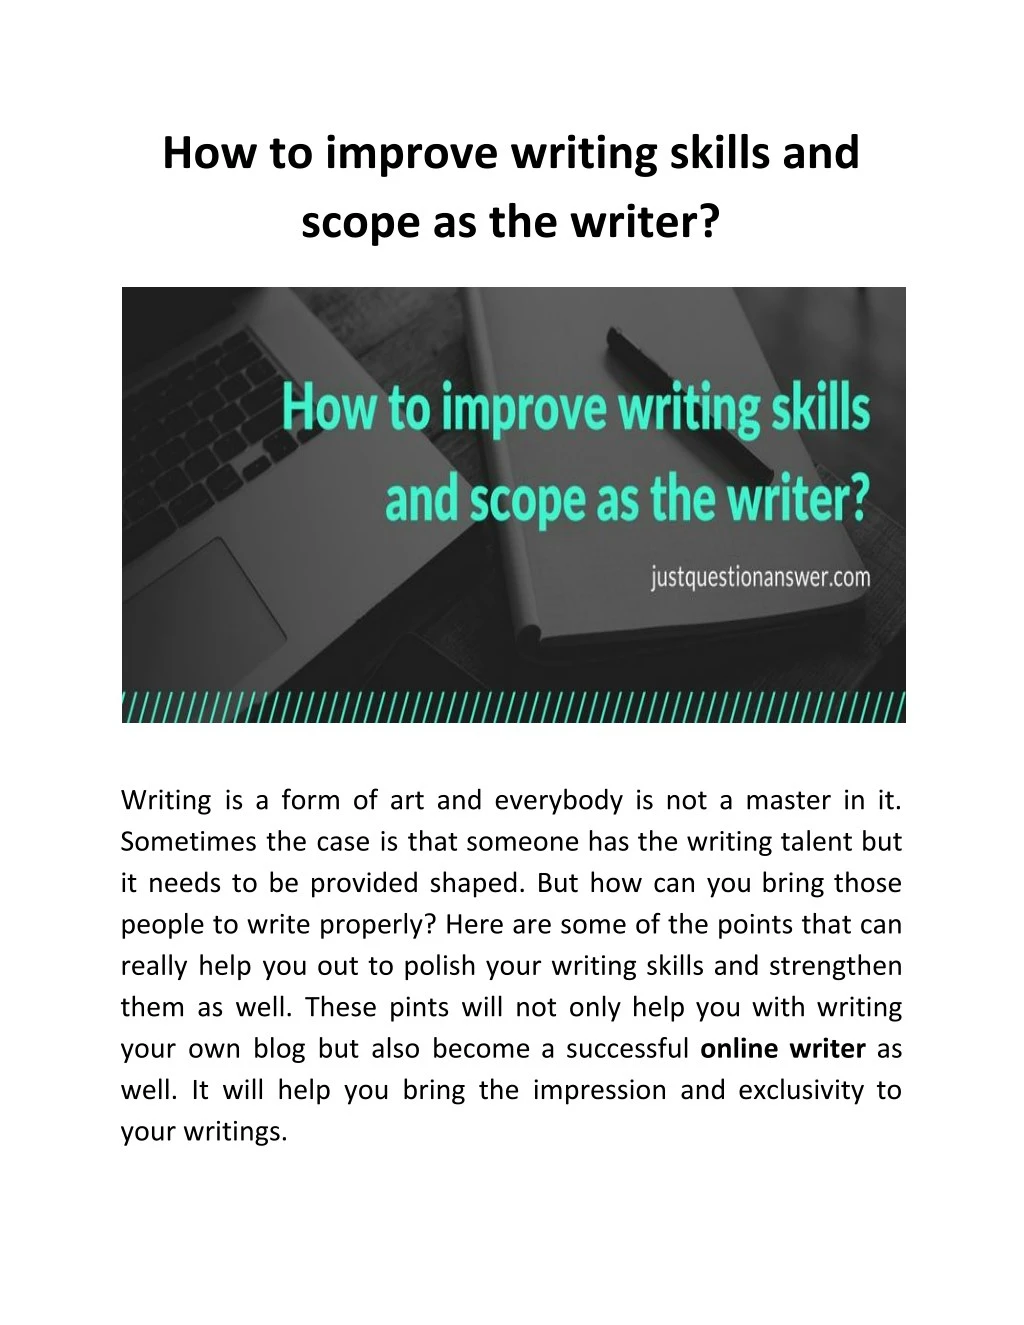 how to improve writing skills and scope